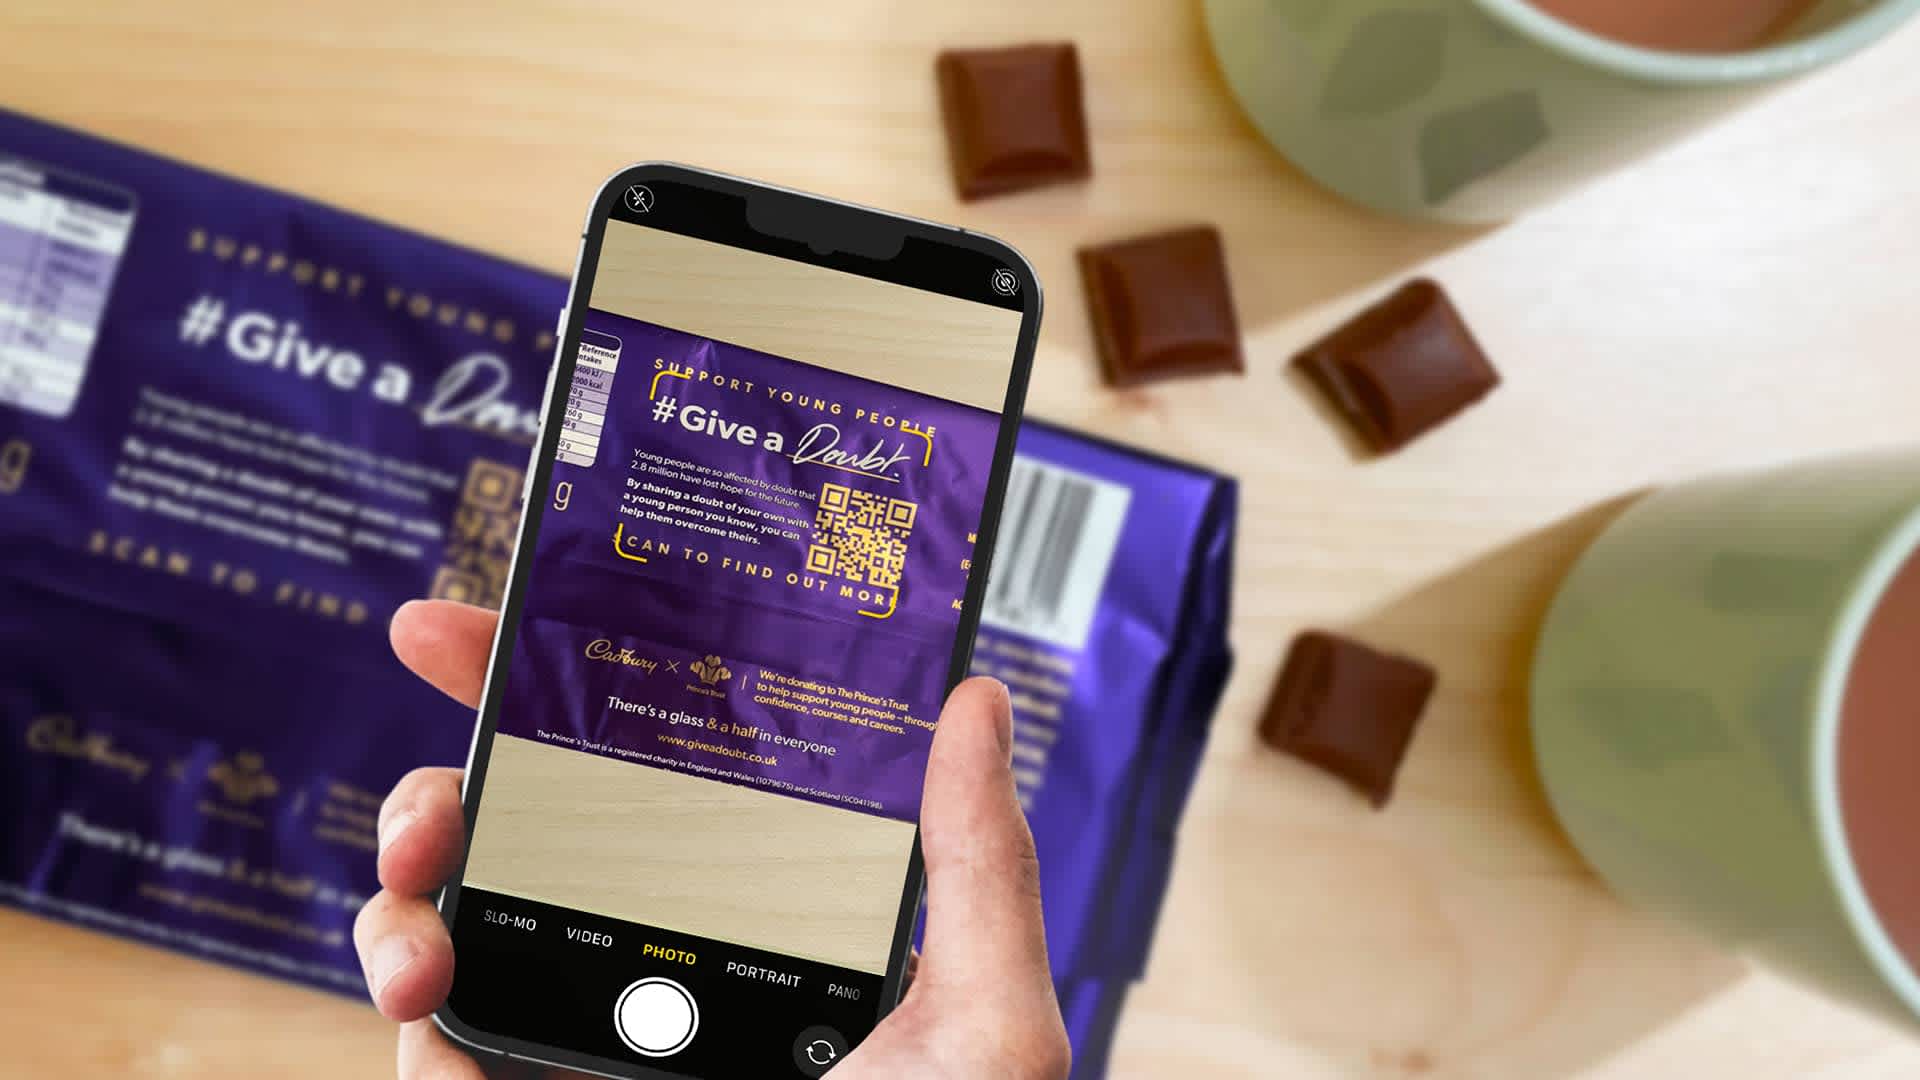 Photo of a smartphone displaying a camera app with a QR code featuring Cadbury packaging and the hashtag #Give a Doubt.